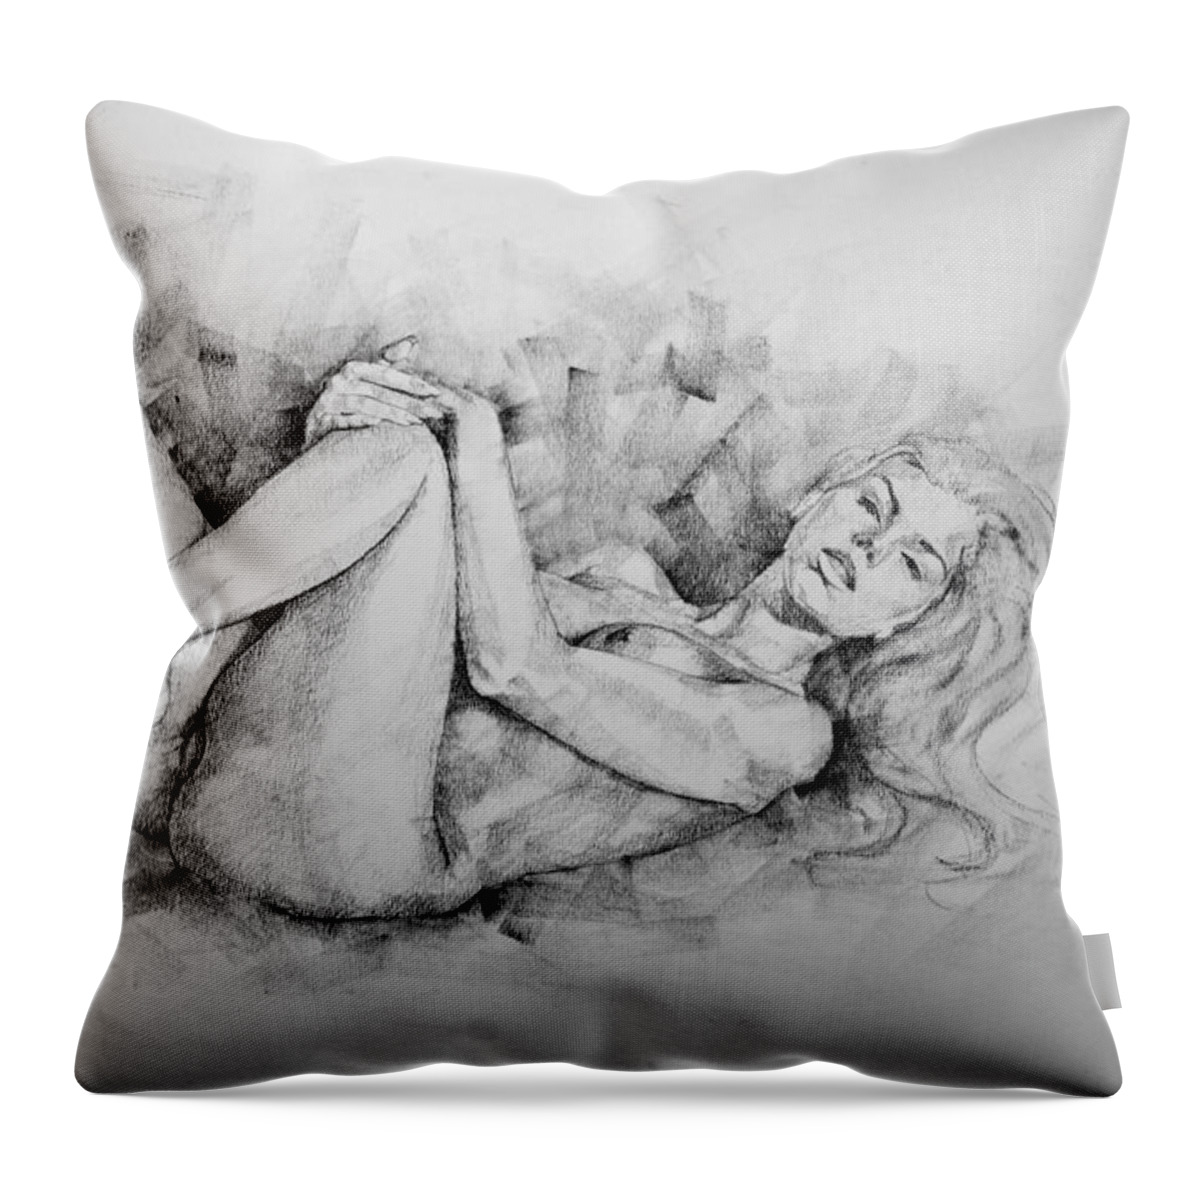 Erotic Throw Pillow featuring the drawing Page 9 by Dimitar Hristov